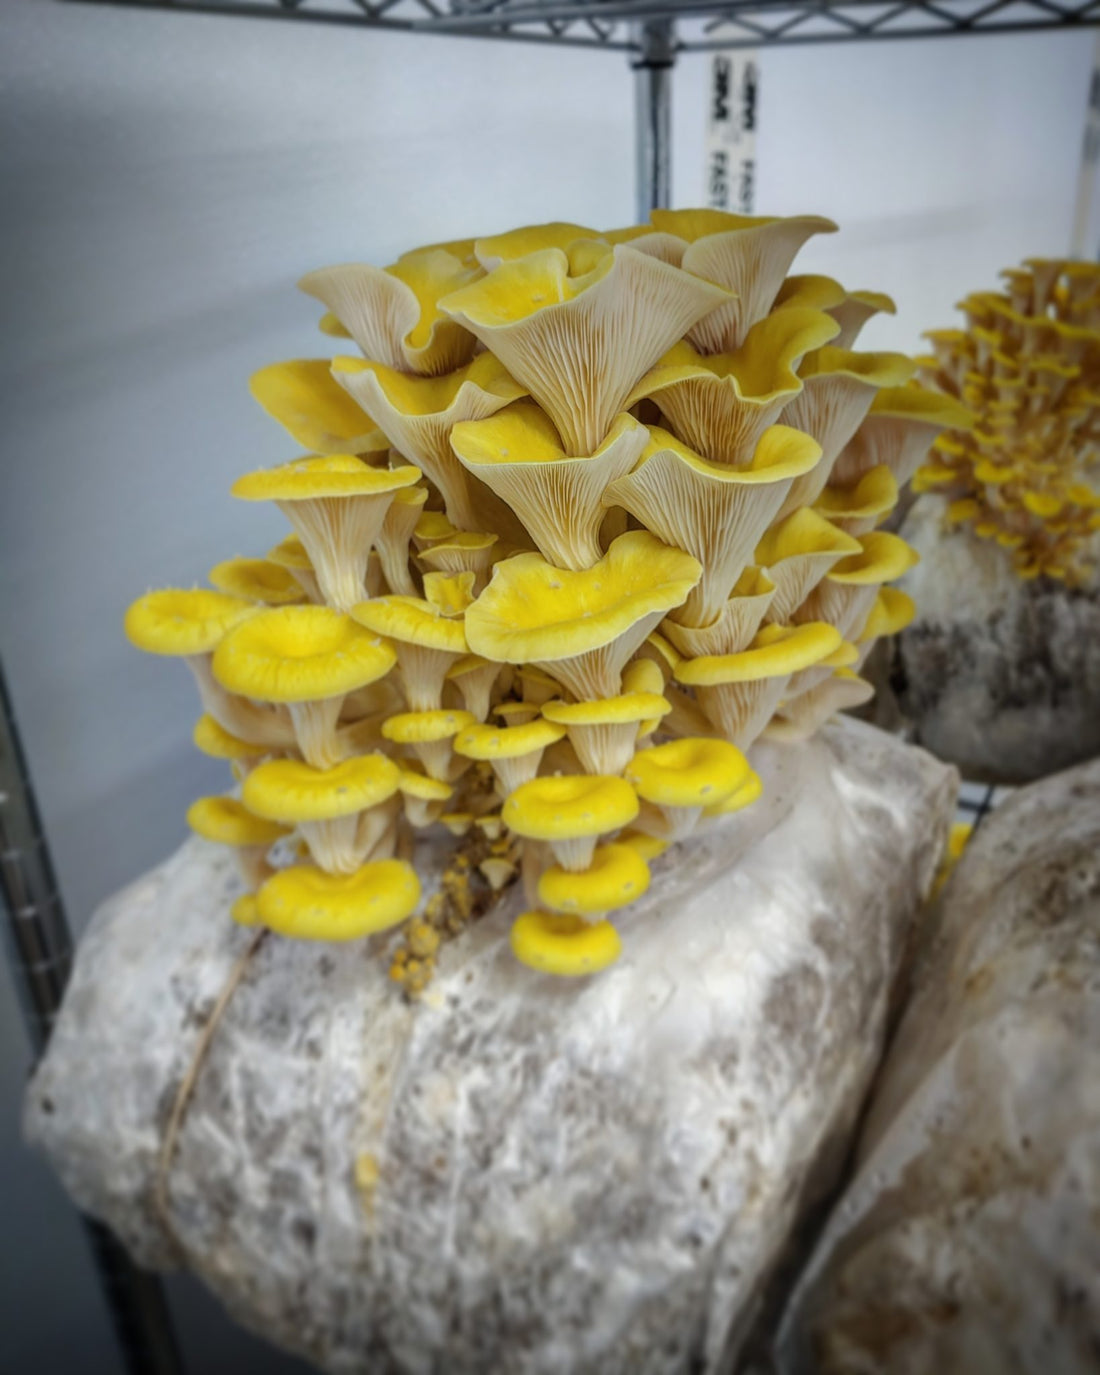 Learn About the Yellow Oyster Mushroom to Bask in Its Vibrancy